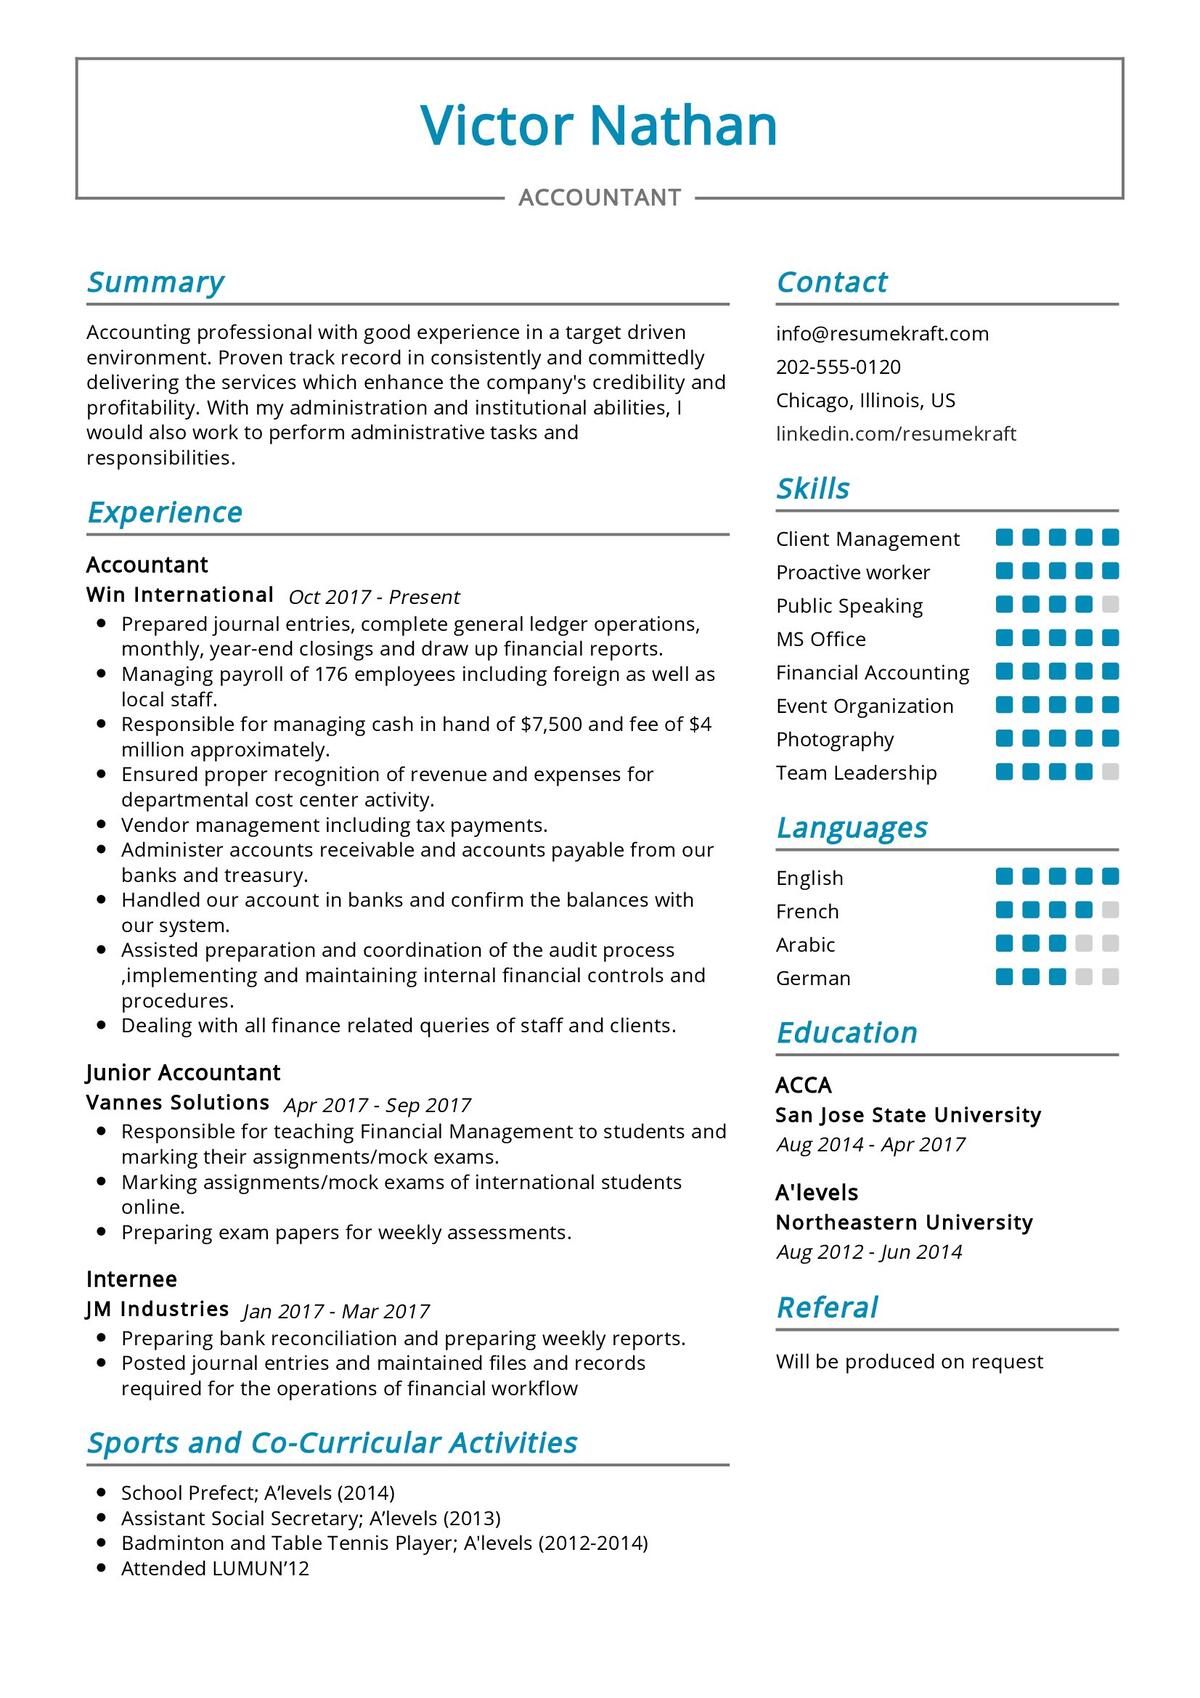 how to write net qualified in resume